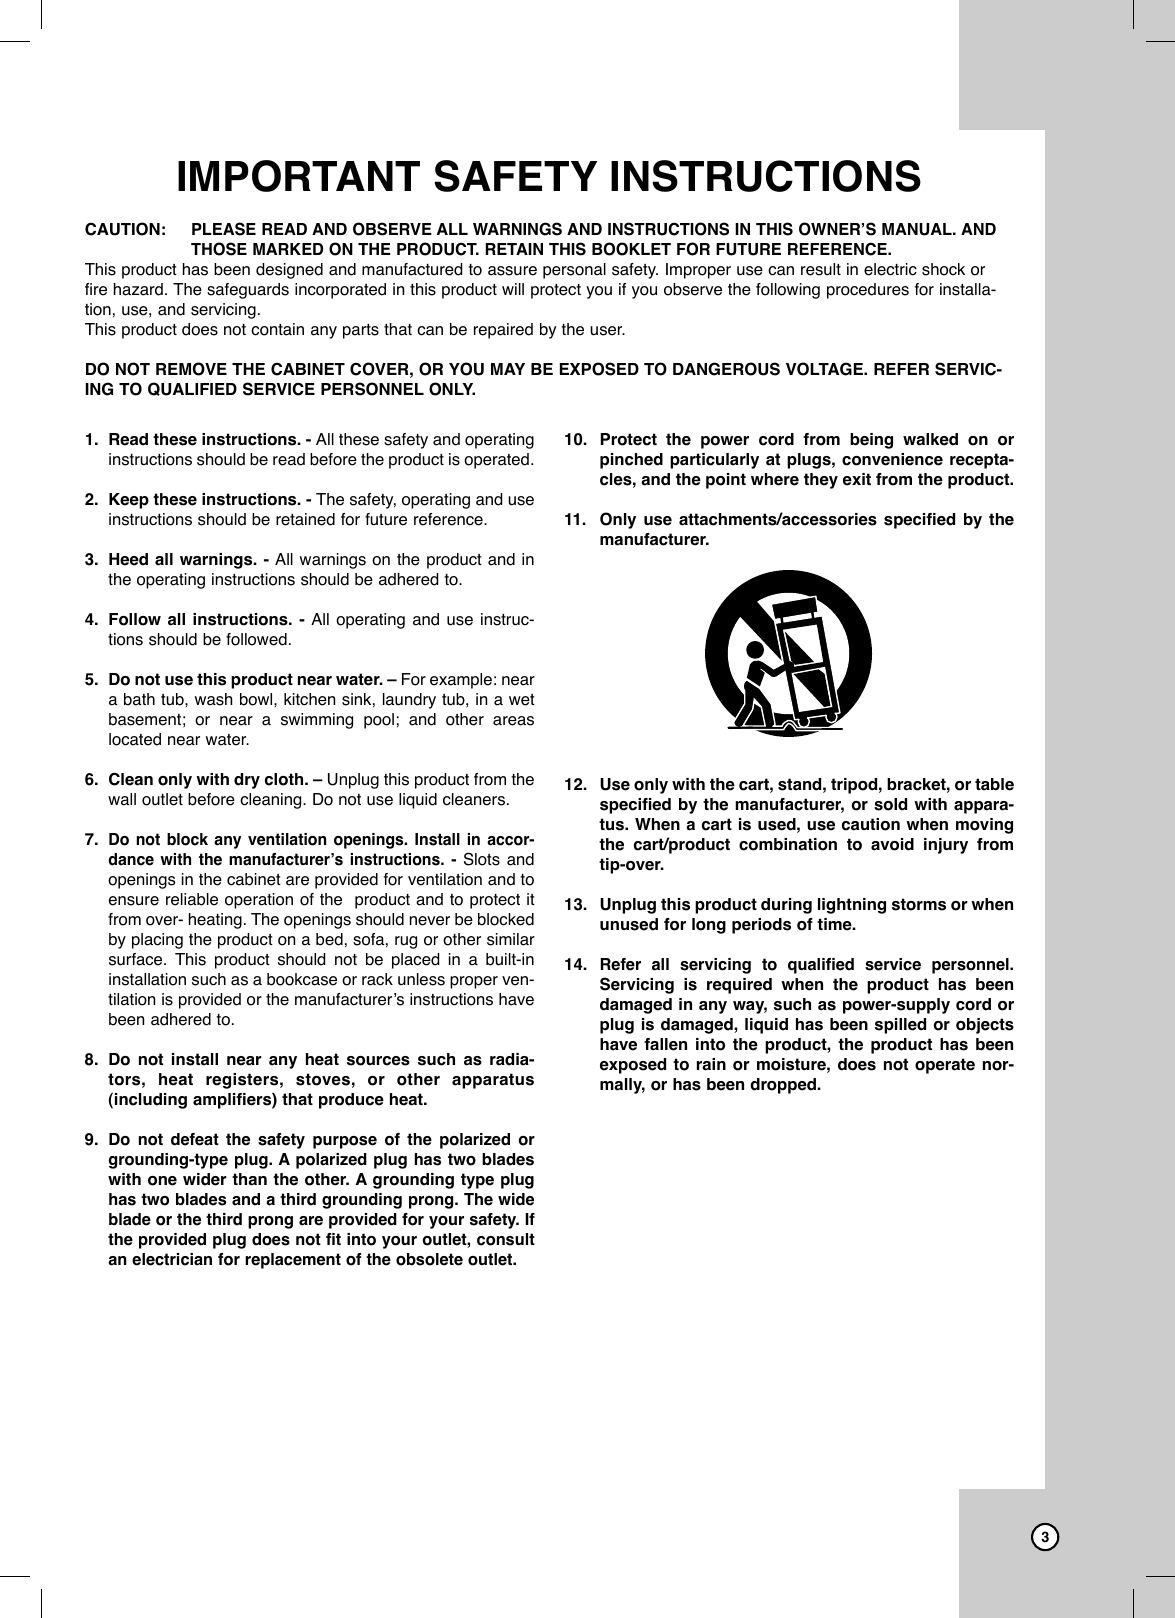 Dubbing31. Read these instructions. - All these safety and operatinginstructions should be read before the product is operated.2. Keep these instructions. - The safety, operating and useinstructions should be retained for future reference.3. Heed all warnings. - All warnings on the product and inthe operating instructions should be adhered to.4. Follow all instructions. - All operating and use instruc-tions should be followed.5. Do not use this product near water. – For example: neara bath tub, wash bowl, kitchen sink, laundry tub, in a wetbasement; or near a swimming pool; and other areaslocated near water.6. Clean only with dry cloth. – Unplug this product from thewall outlet before cleaning. Do not use liquid cleaners.7.Do not block any ventilation openings. Install in accor-dance with the manufacturer’s instructions. - Slots andopenings in the cabinet are provided for ventilation and toensure reliable operation of the  product and to protect itfrom over- heating. The openings should never be blockedby placing the product on a bed, sofa, rug or other similarsurface. This product should not be placed in a built-ininstallation such as a bookcase or rack unless proper ven-tilation is provided or the manufacturer’s instructions havebeen adhered to.8. Do not install near any heat sources such as radia-tors, heat registers, stoves, or other apparatus(including amplifiers) that produce heat.9. Do not defeat the safety purpose of the polarized orgrounding-type plug. A polarized plug has two bladeswith one wider than the other. A groundingtype plughas two blades and a third grounding prong. The wideblade or the third prong are provided for your safety. Ifthe provided plug does not fit into your outlet, consultan electrician for replacement of the obsolete outlet.10. Protect the power cord from being walked on orpinched particularly at plugs, convenience recepta-cles, and the point where they exit from the product.11. Only use attachments/accessories specified by themanufacturer.12. Use only with the cart, stand, tripod, bracket, or tablespecified by the manufacturer, or sold with appara-tus. When a cart is used, use caution when movingthe cart/product combination to avoid injury fromtip-over.13. Unplug this product during lightning storms or whenunused for long periods of time.14.Refer all servicing to qualified service personnel.Servicing is required when the product has beendamaged in any way, such as power-supply cord orplug is damaged, liquid has been spilled or objectshave fallen into the product, the product has beenexposed to rain or moisture, does not operate nor-mally, or has been dropped.IMPORTANT SAFETY INSTRUCTIONSCAUTION:PLEASE READ AND OBSERVE ALL WARNINGS AND INSTRUCTIONS IN THIS OWNER’S MANUAL. ANDTHOSE MARKED ON THE PRODUCT. RETAIN THIS BOOKLET FOR FUTURE REFERENCE.This product has been designed and manufactured to assure personal safety. Improper use can result in electric shock orfire hazard. The safeguards incorporated in this product will protect you if you observe the following procedures for installa-tion, use, and servicing.This product does not contain any parts that can be repaired by the user.DO NOT REMOVE THE CABINET COVER, OR YOU MAY BE EXPOSED TO DANGEROUS VOLTAGE. REFER SERVIC-ING TO QUALIFIED SERVICE PERSONNEL ONLY.